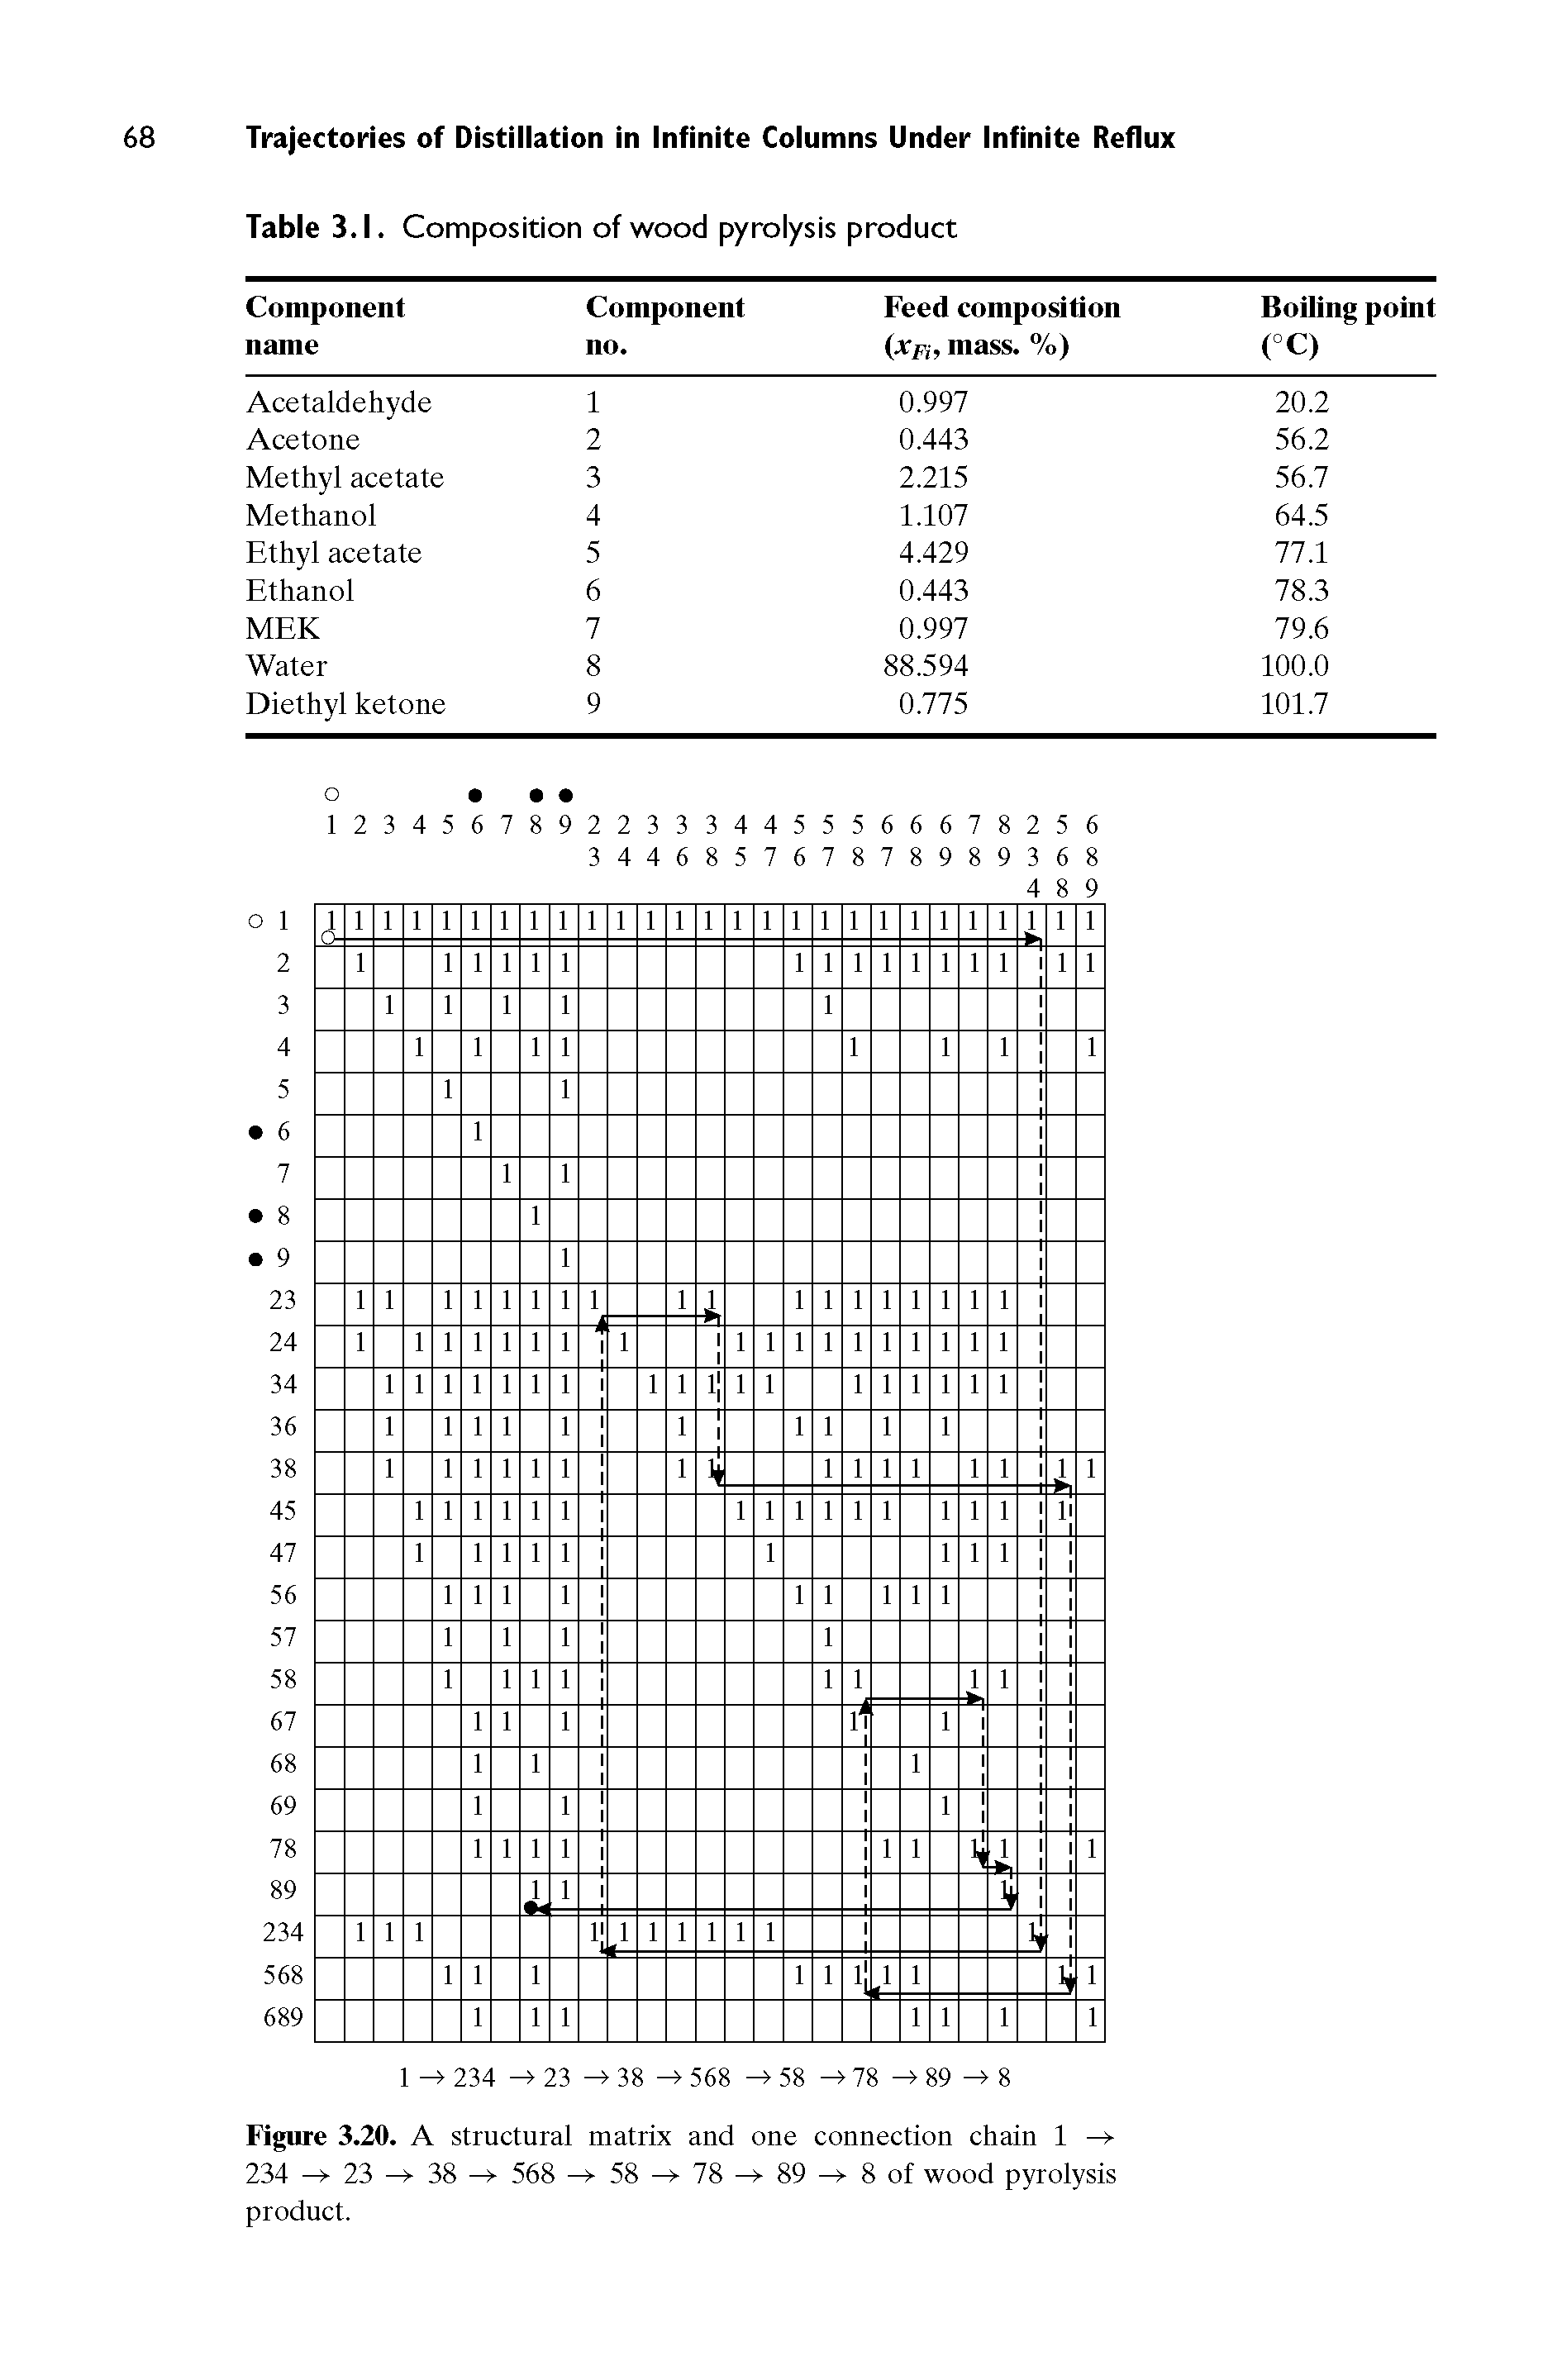 Figure 3.20. A structural matrix and one connection chain 1 234 23 38 568 58 78 89 8 of wood pyrolysis product.